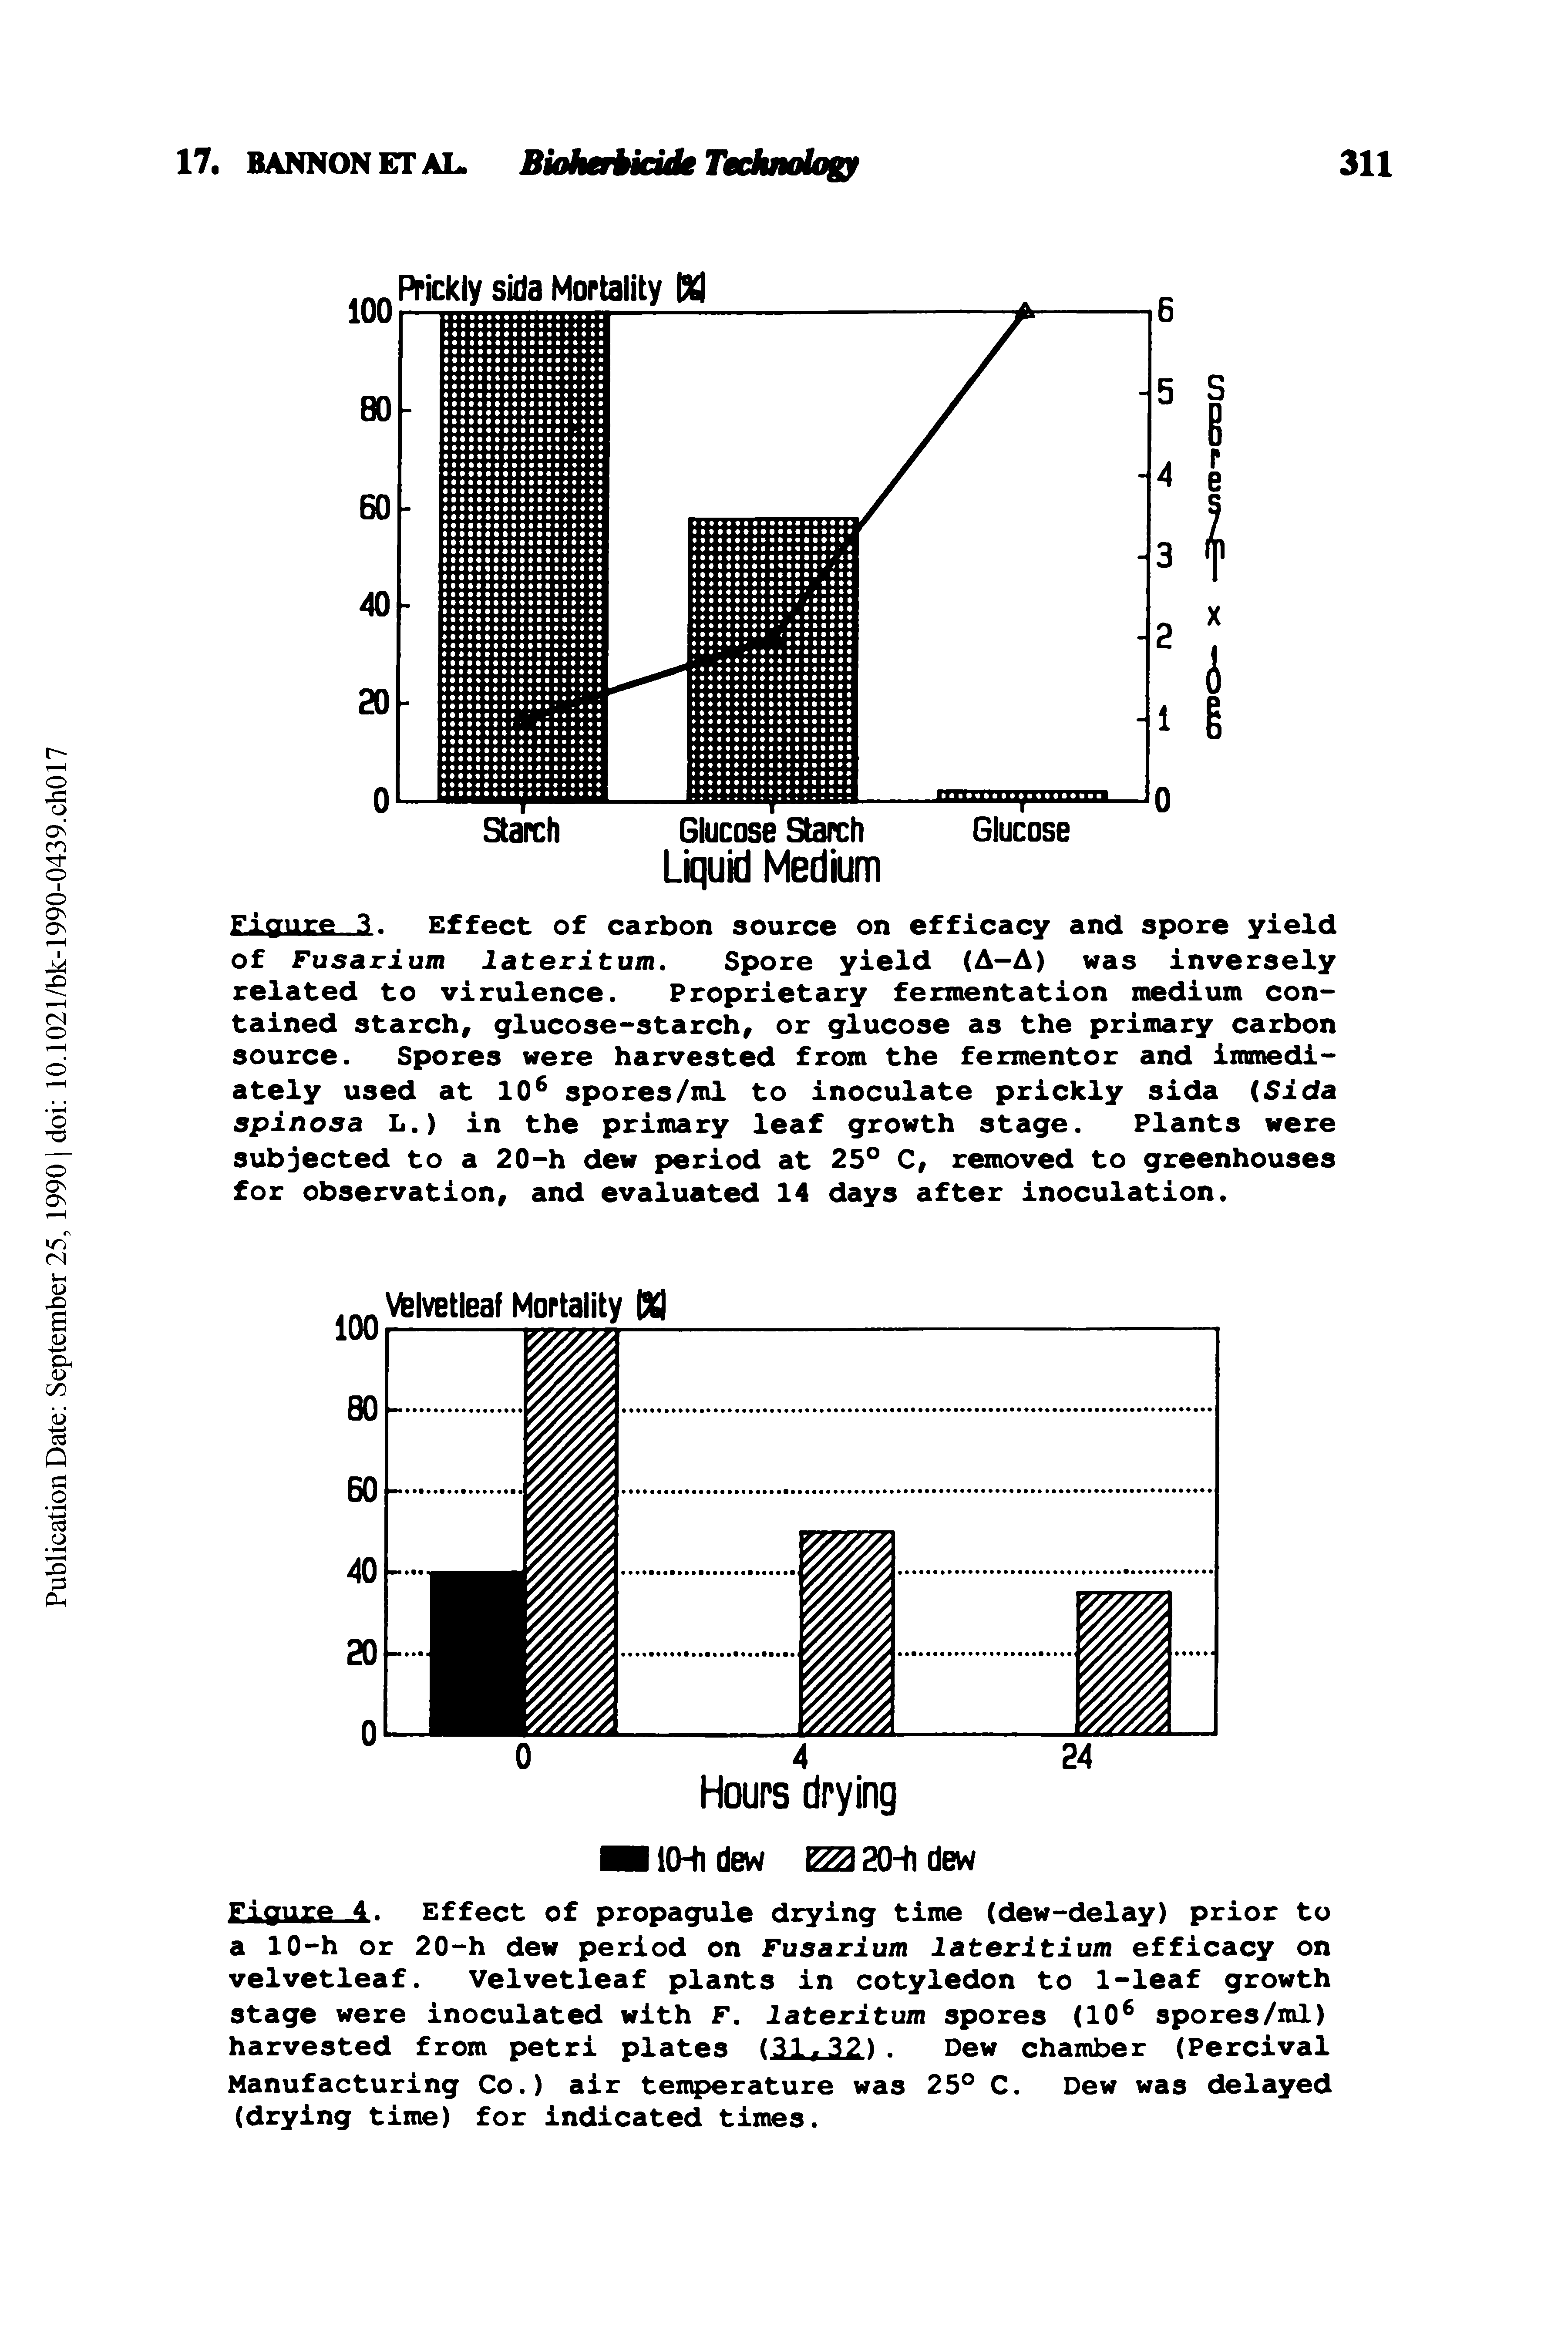 Figure 3. Effect of carbon source on efficacy and spore yield of Fusarium lateritum. Spore yield (A-A) was inversely related to virulence. Proprietary fermentation medium contained starch, glucose-starch, or glucose as the primary carbon source. Spores were harvested from the fermentor and immediately used at 10 spores/ml to inoculate prickly sida Sida spinosa L.) in the primary leaf growth stage. Plants were subjected to a 20-h dew period at 25° C, removed to greenhouses for observation, and evaluated 14 days after inoculation.